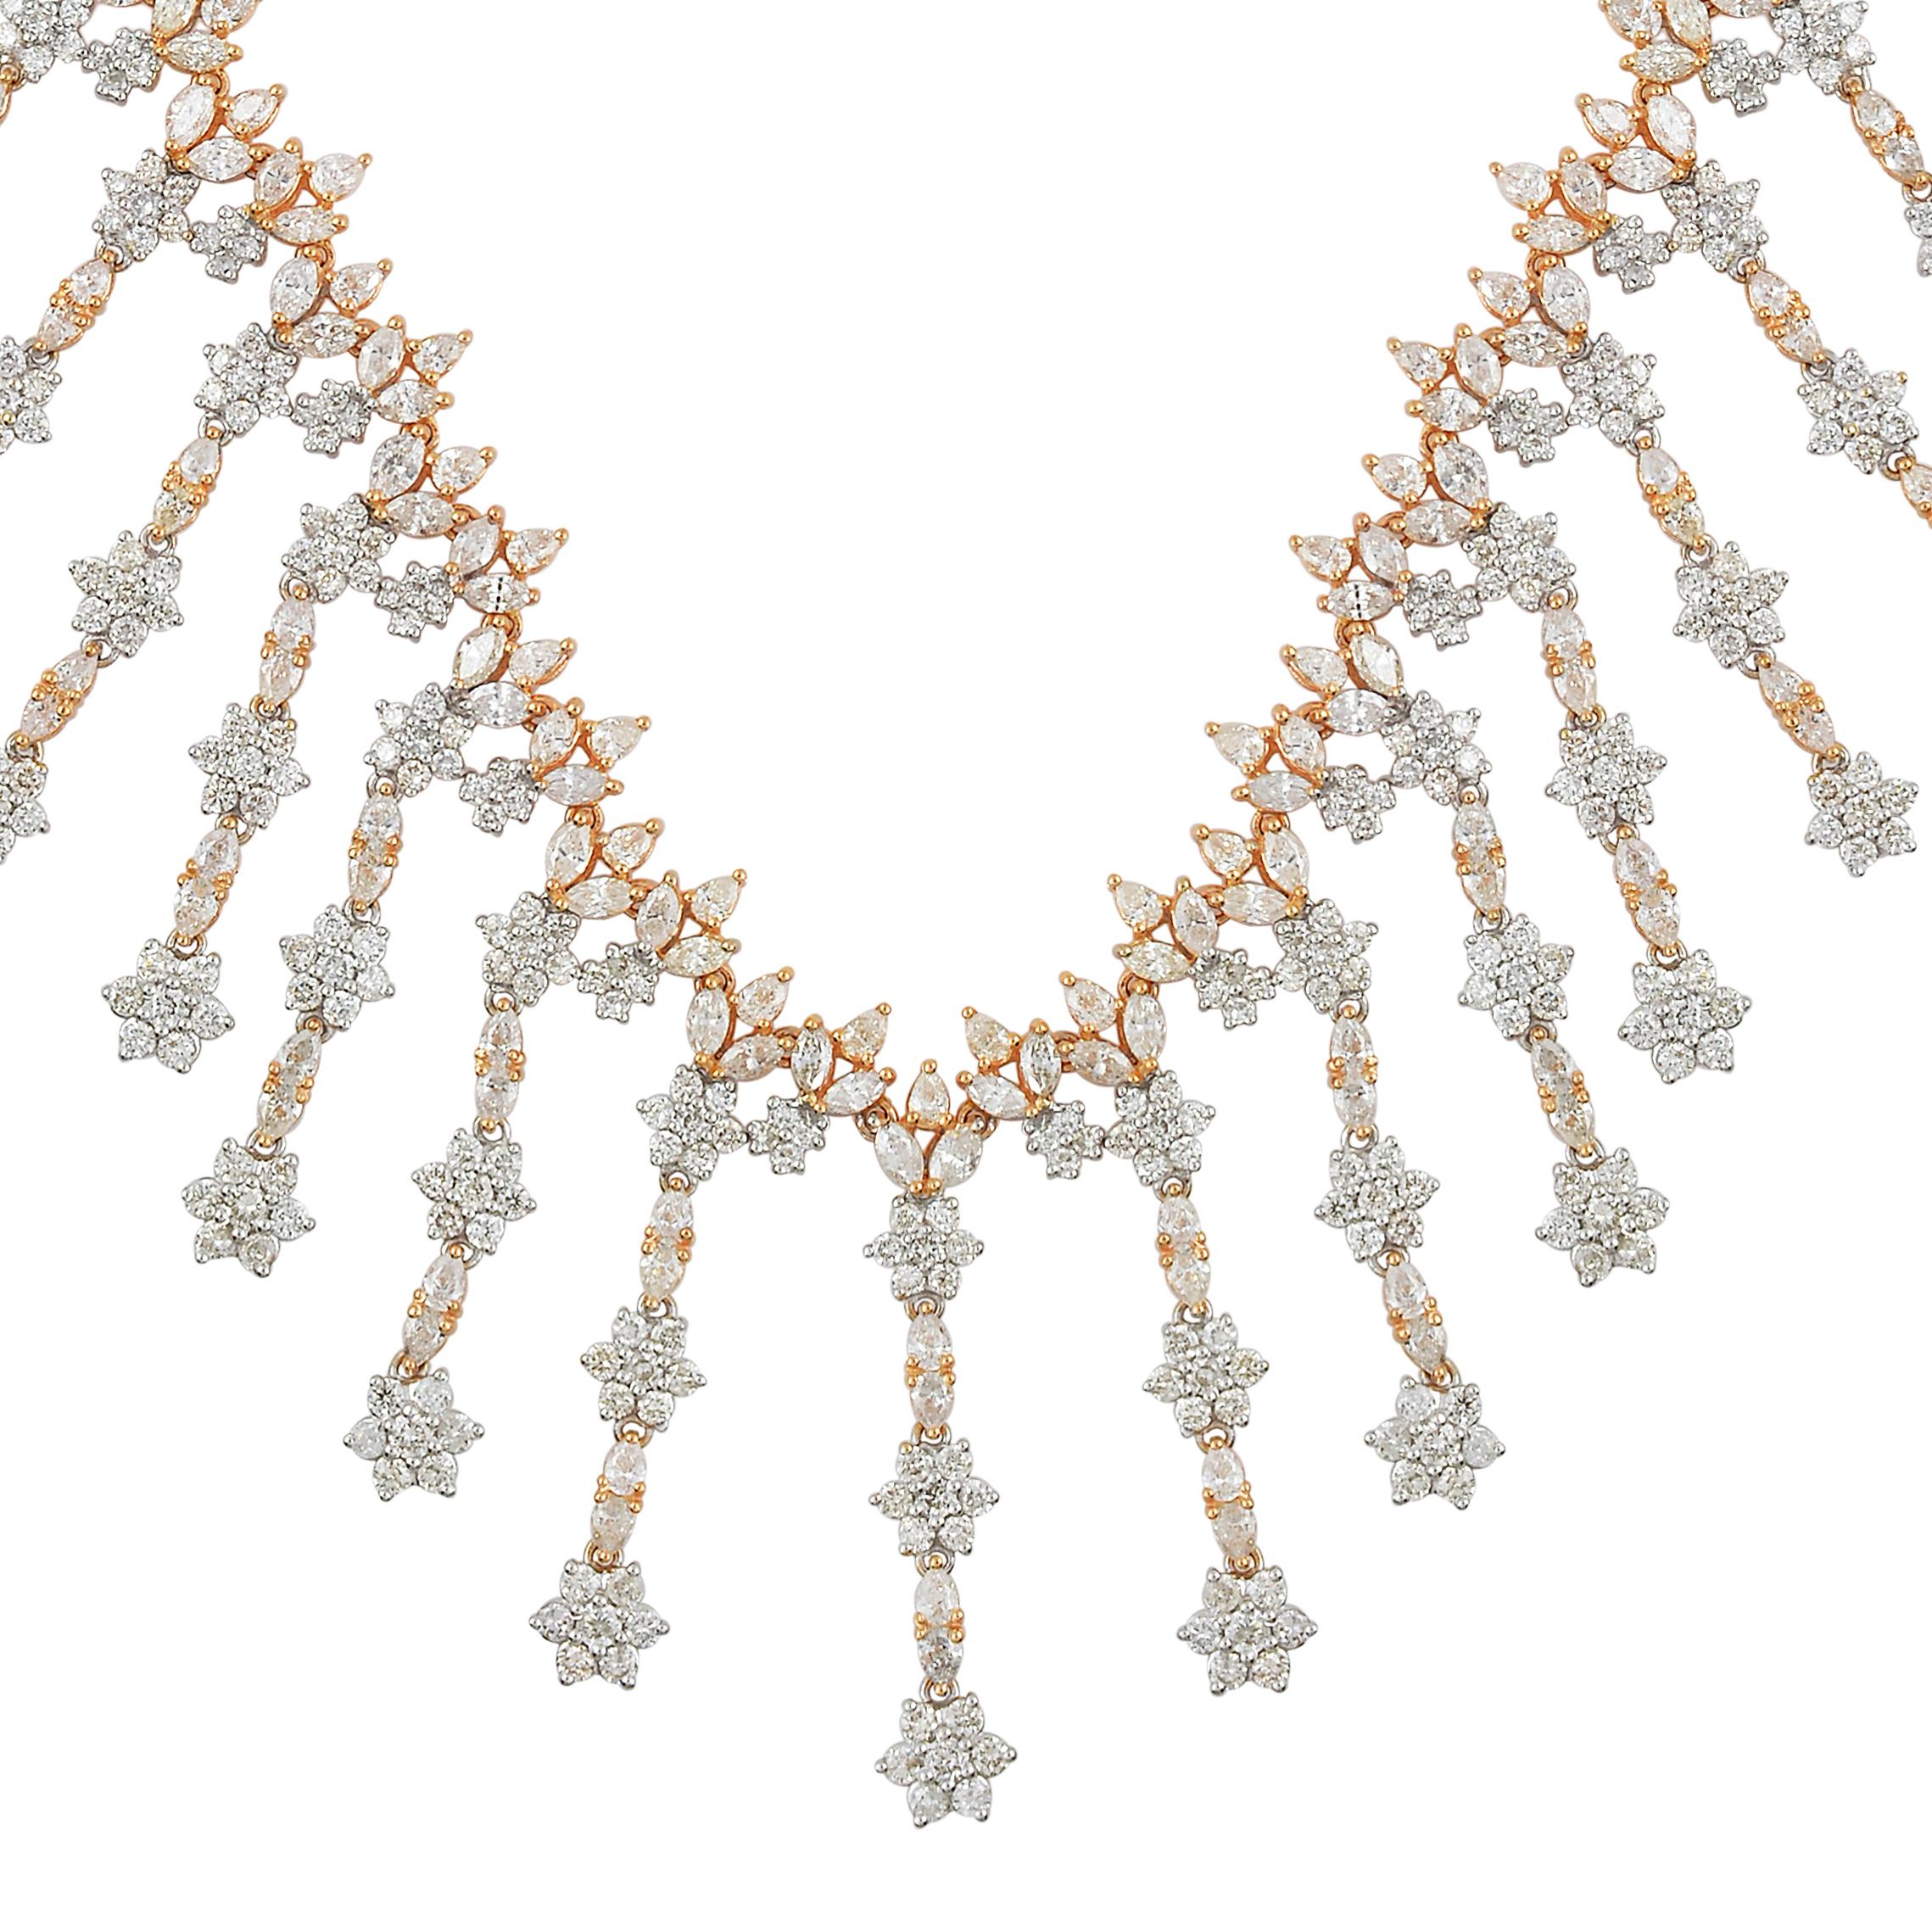 This necklace is a true statement piece, exuding opulence and refinement. Its delicate chain, also crafted in 14 karat white and yellow gold, complements the charm perfectly, creating a seamless and elegant look. The chain is adjustable, allowing